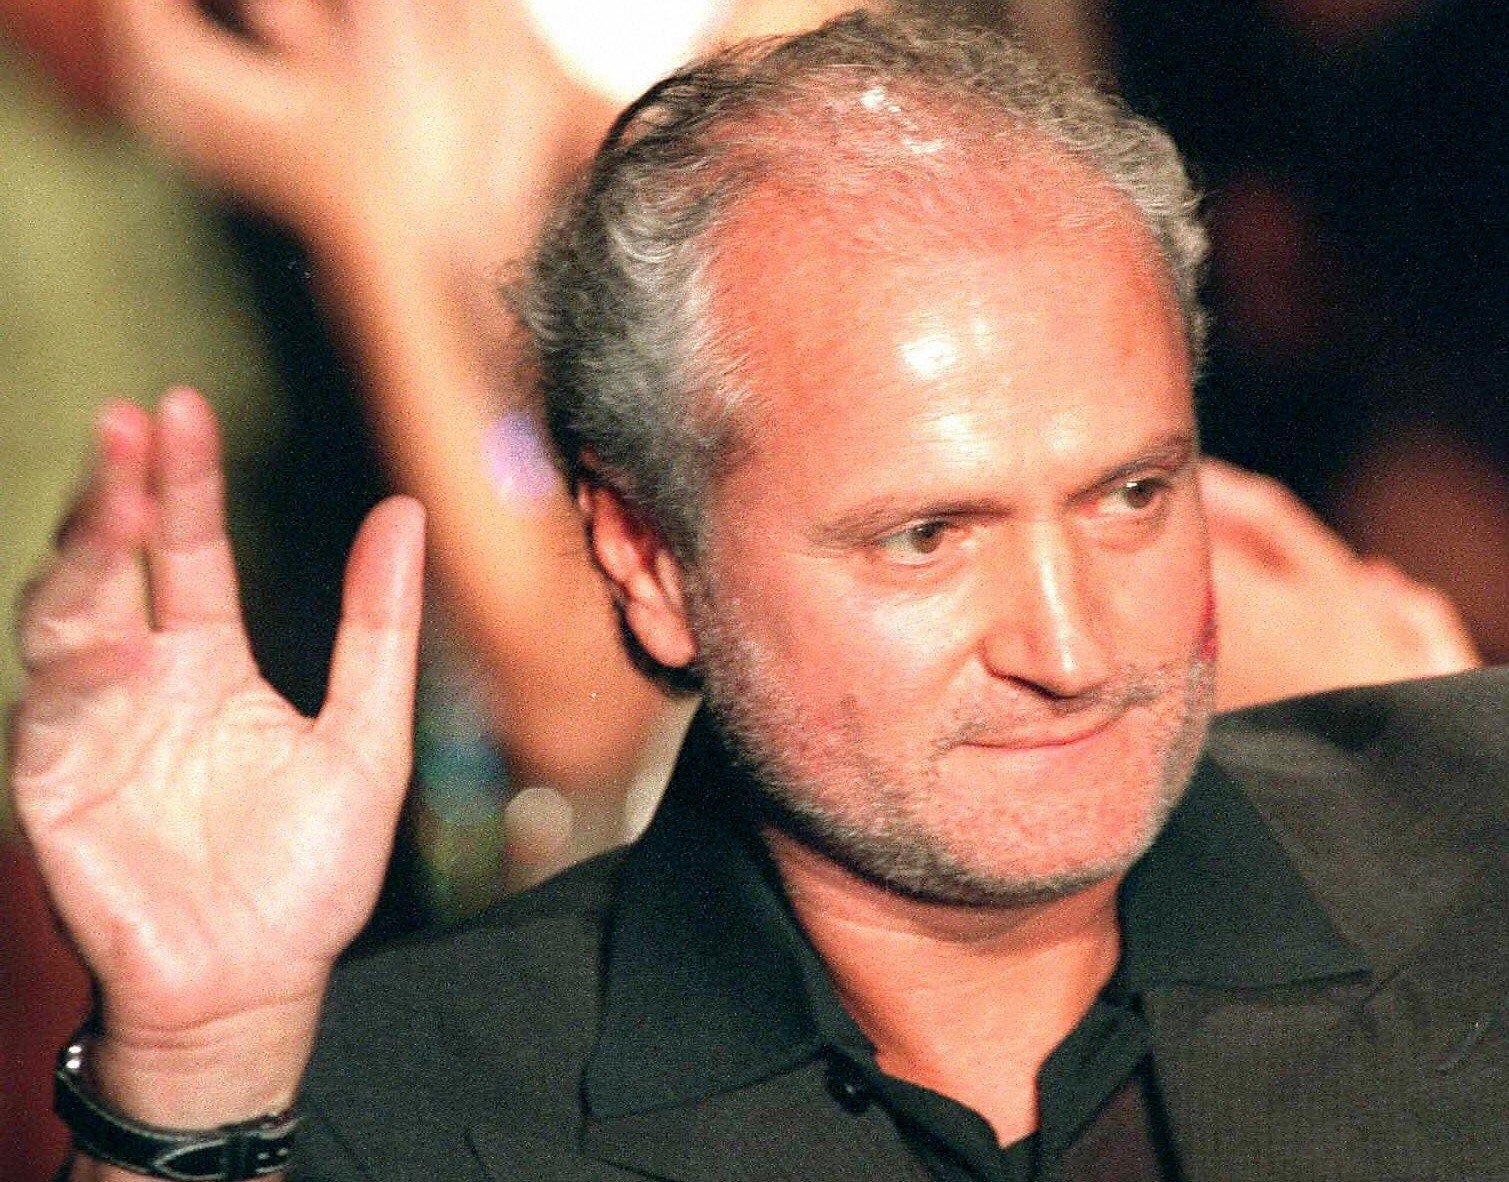 Gianni Versace waving at a crowd during a fashion show. 